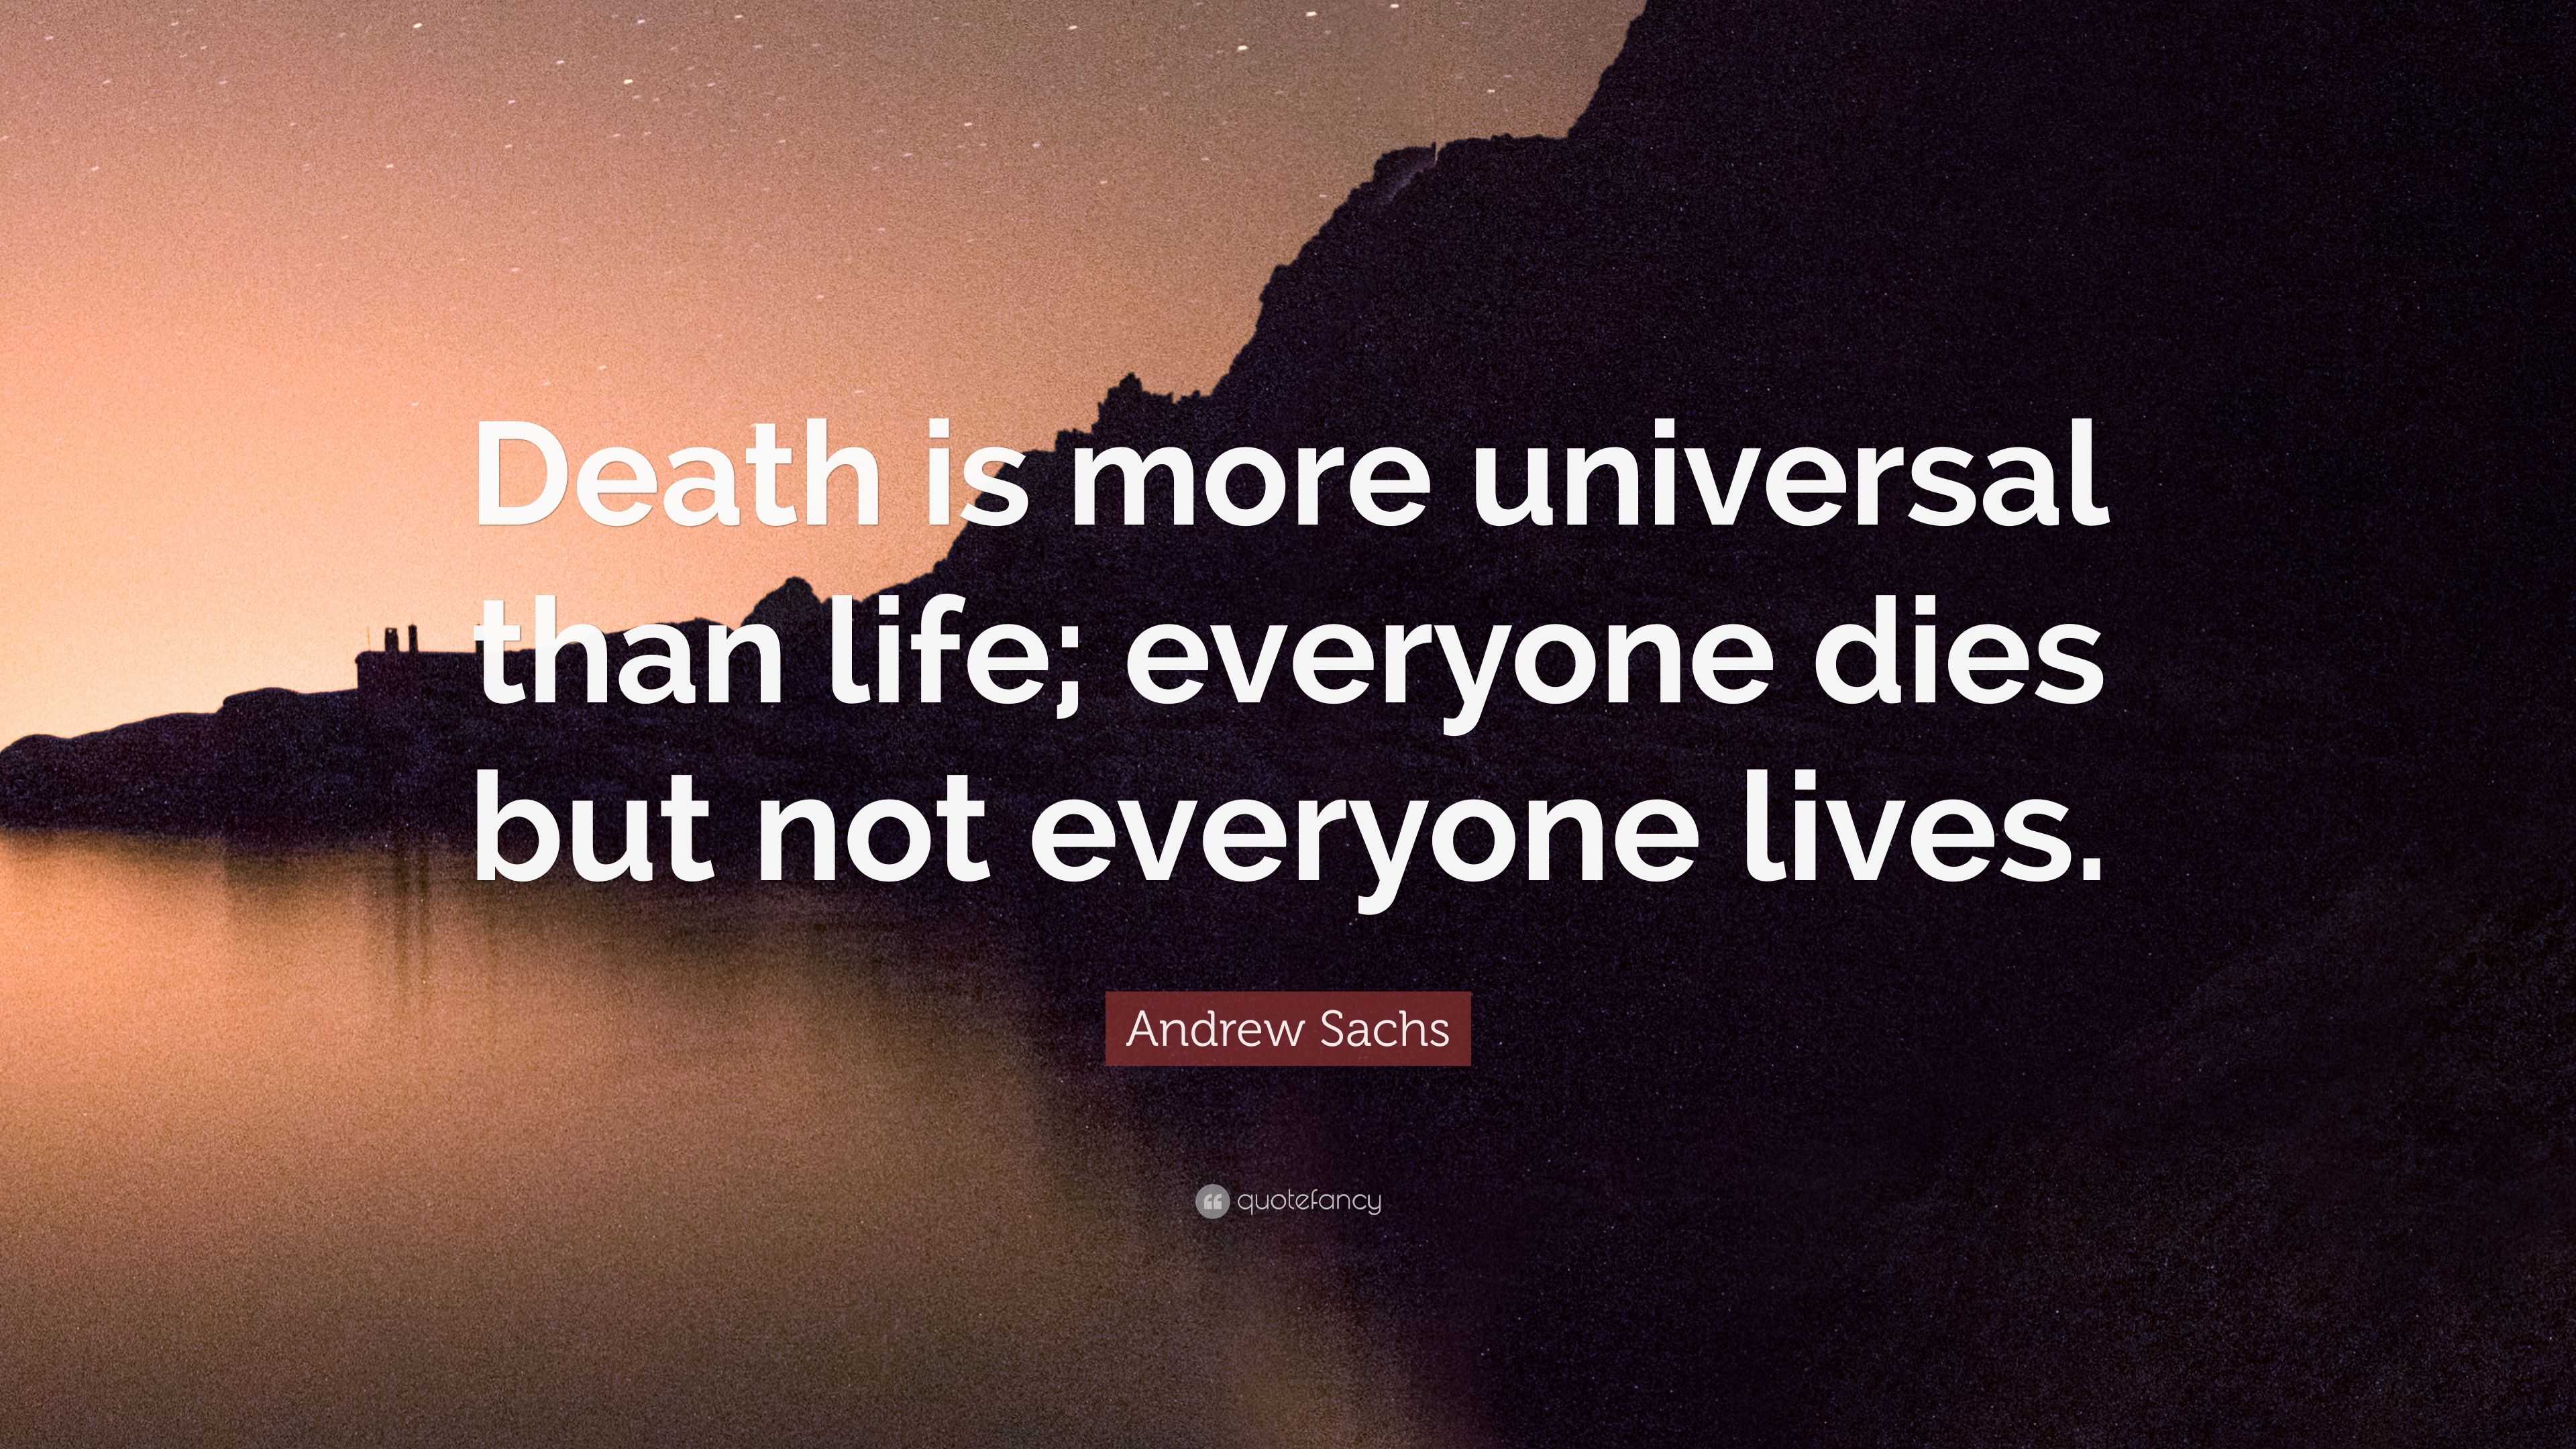 Andrew Sachs Quote: "Death is more universal than life; everyone dies but not everyone lives."